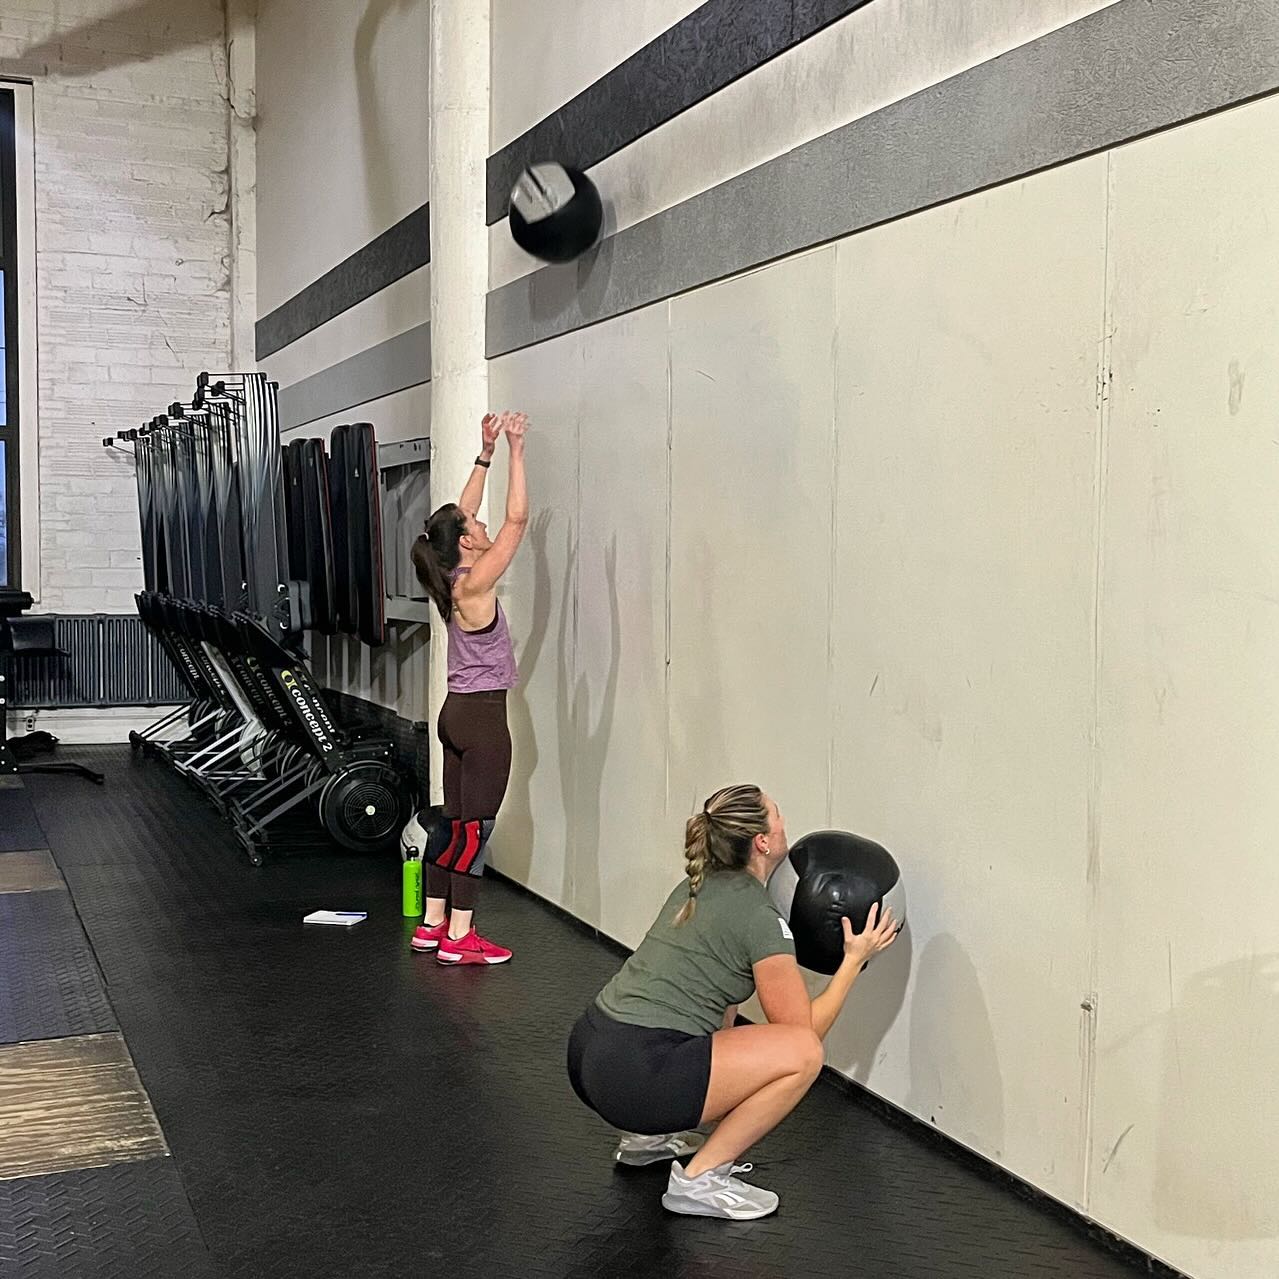 How are our legs feeling after the heavy lunges and wall balls? A small reprieve today to focus on upper-body push/pull movements. Such a fun week so far! See you in class ❤️🍑🔥

 #BirdtownStrength #BirdtownStrong #FunctionalFitness #BeBetter #RedefiningStrength #TeamWorkMakesTheDreamWork #WeAreBirdtown #Lakewood #Ohio #LakewoodOhio